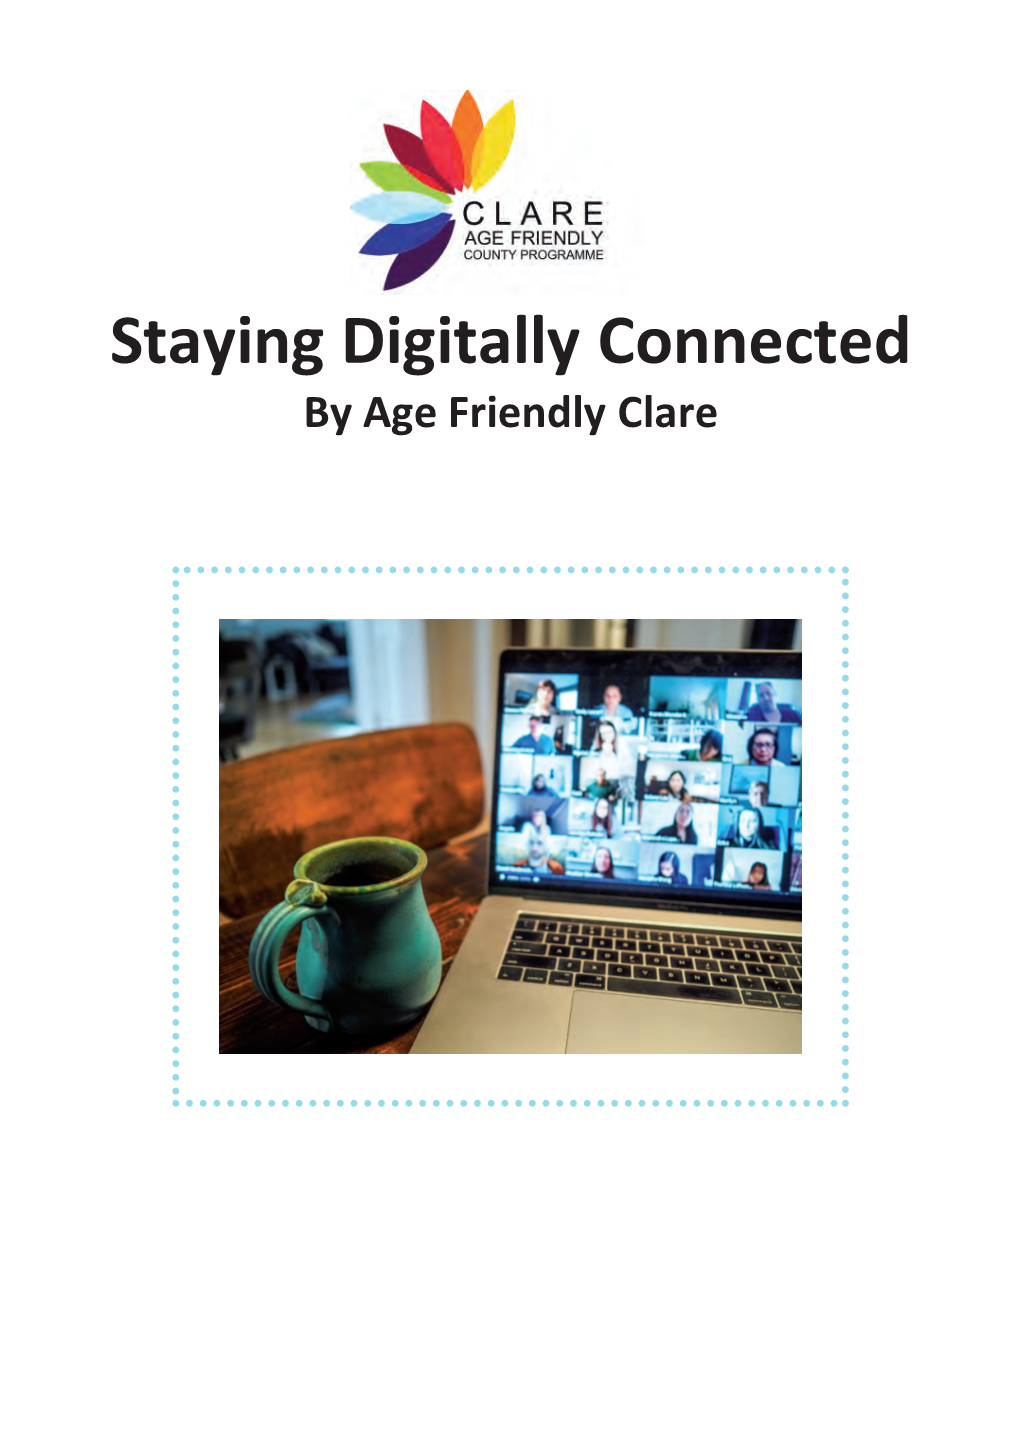 Staying Digitally Connected by Age Friendly Clare